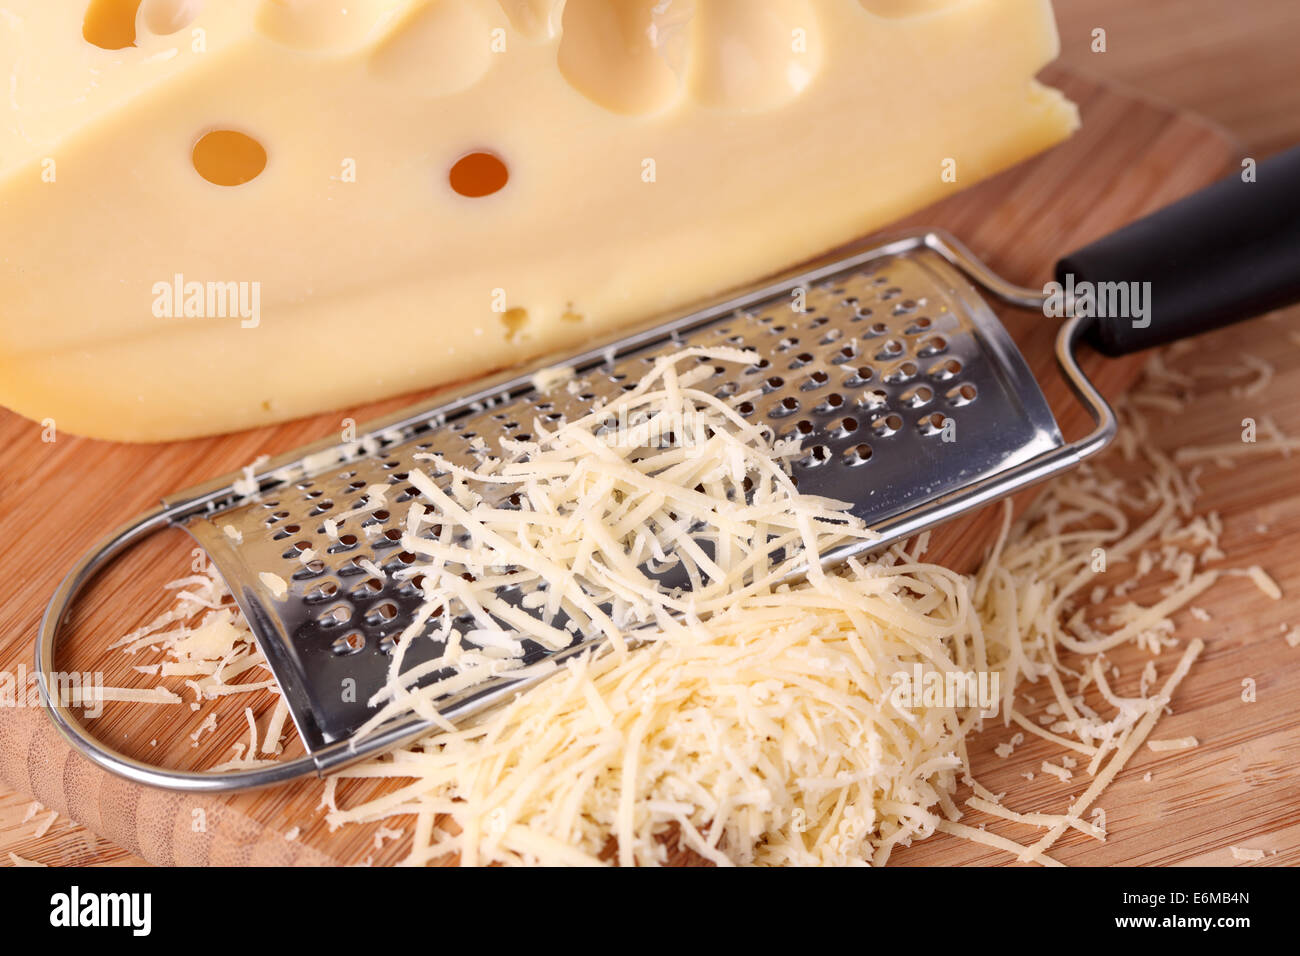 Grated cheese and grater on a wooden cutting board Stock Photo